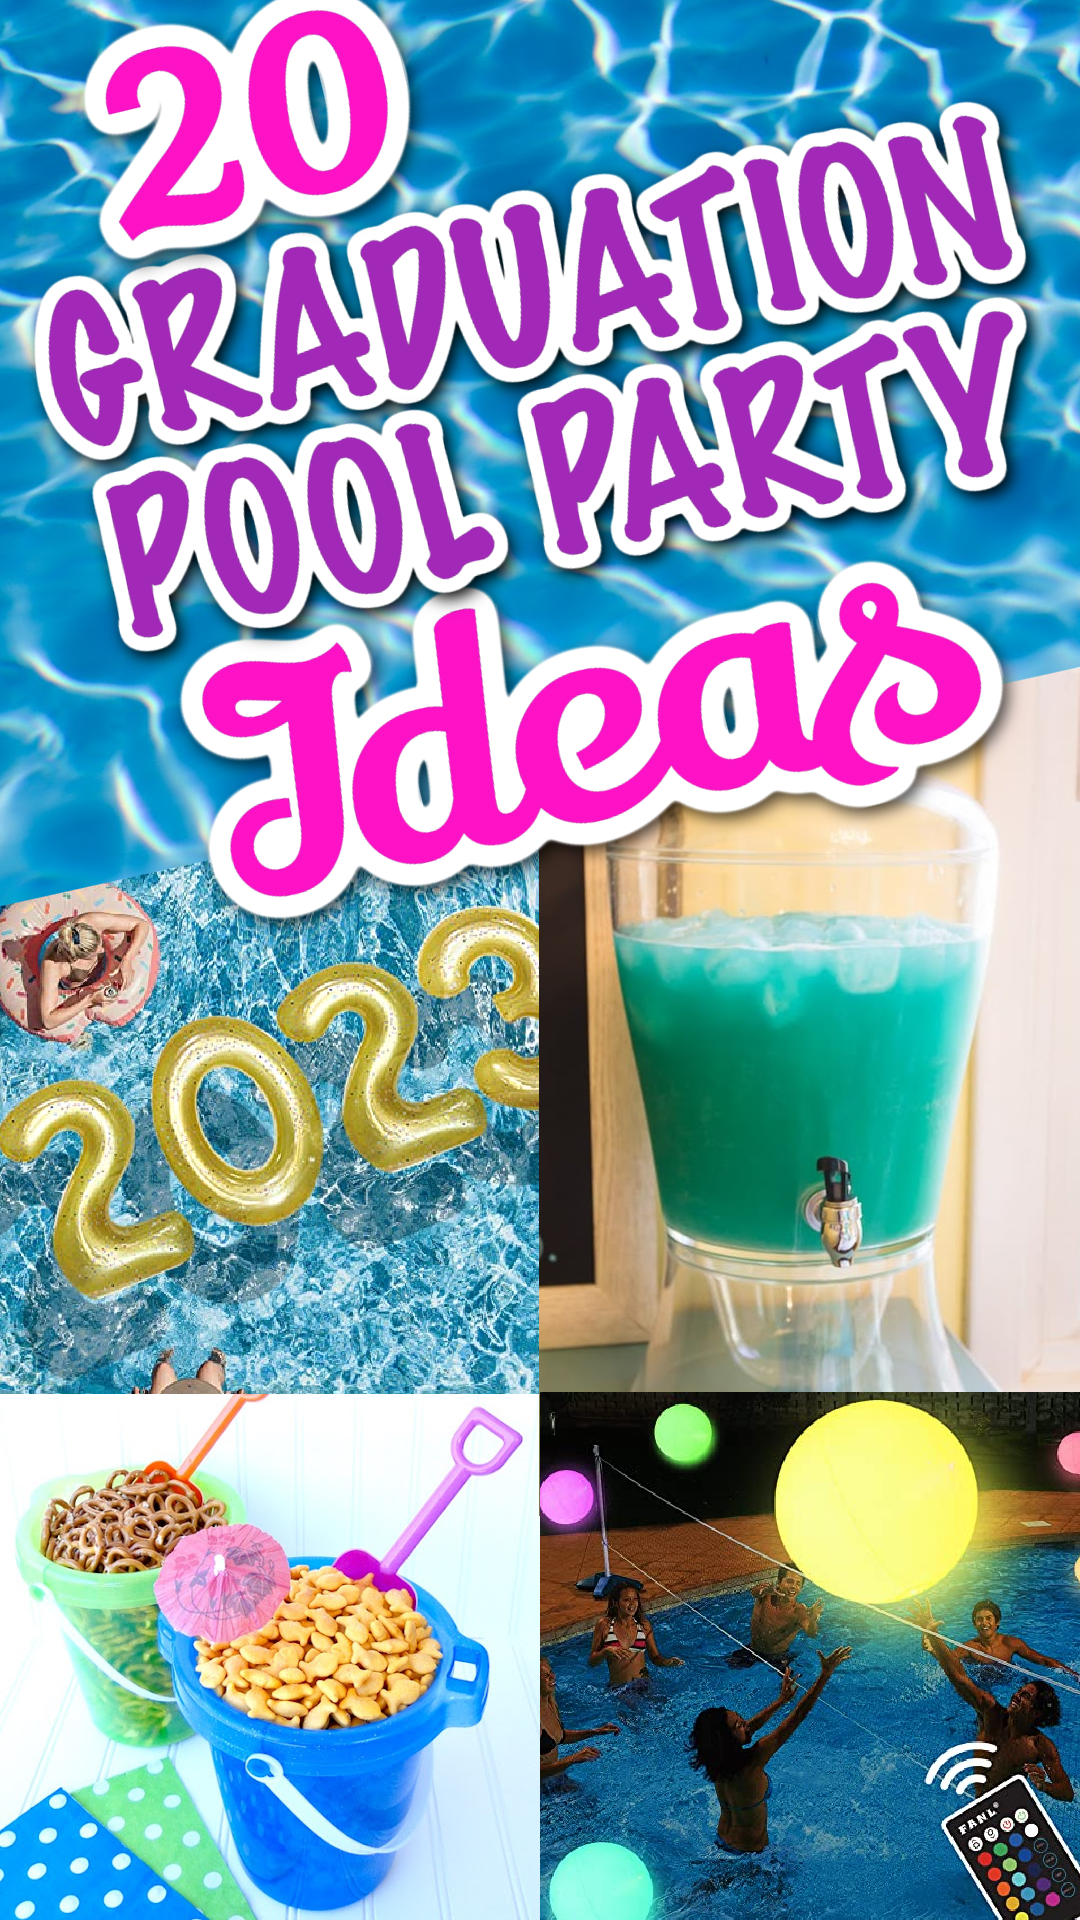 a collage of grad pool Party ideas including beachball themed foods and party decor, grad pool decoration and food ideas like a "pool water" drink.